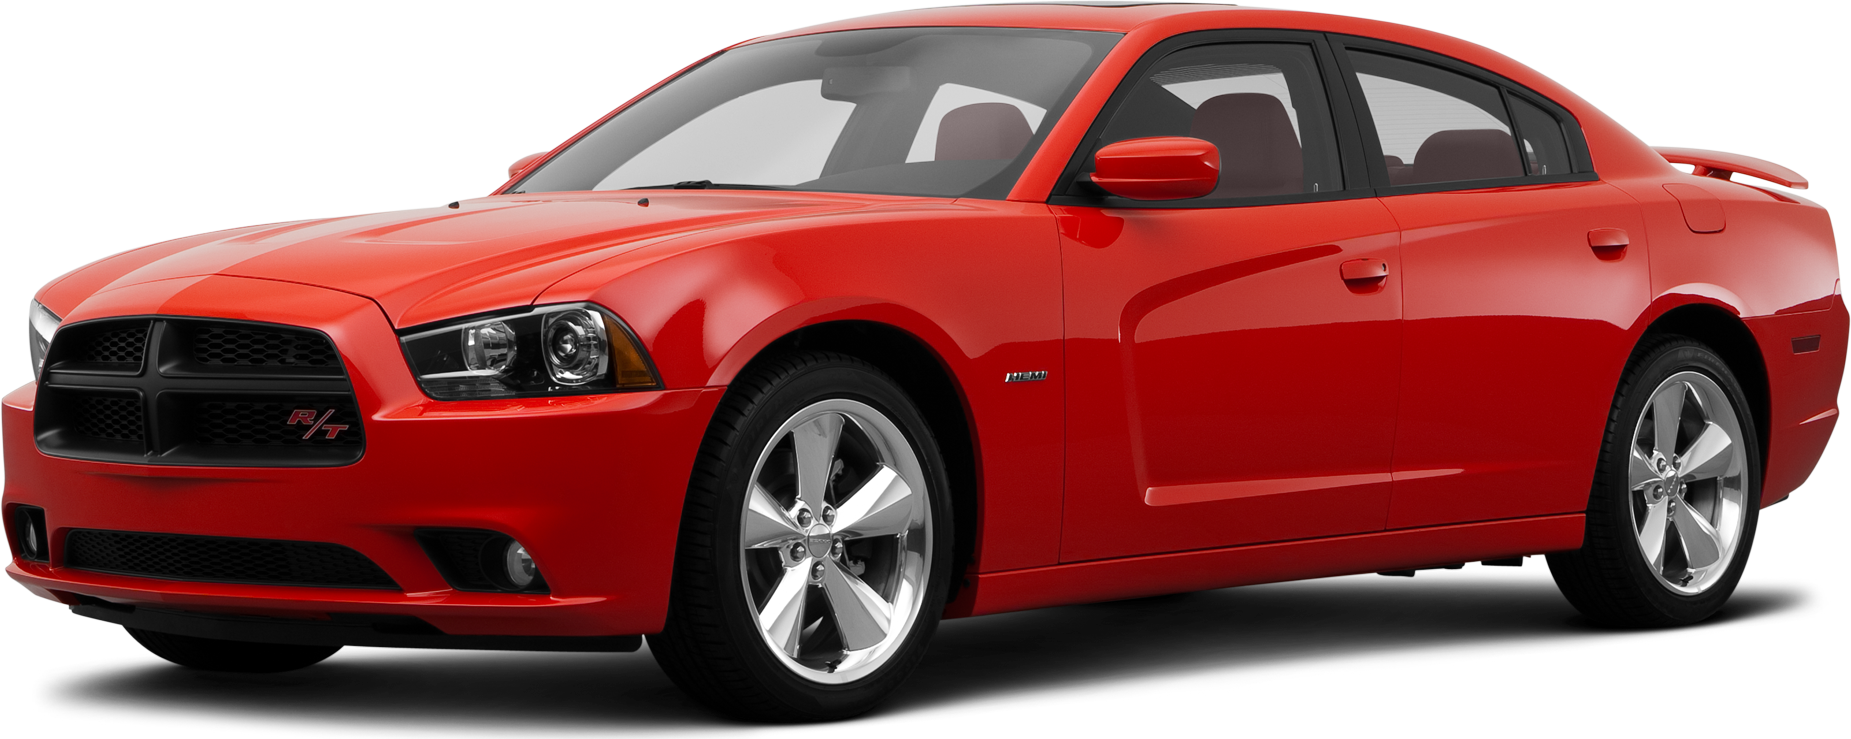 2014 Dodge Charger Review, Pricing, & Pictures